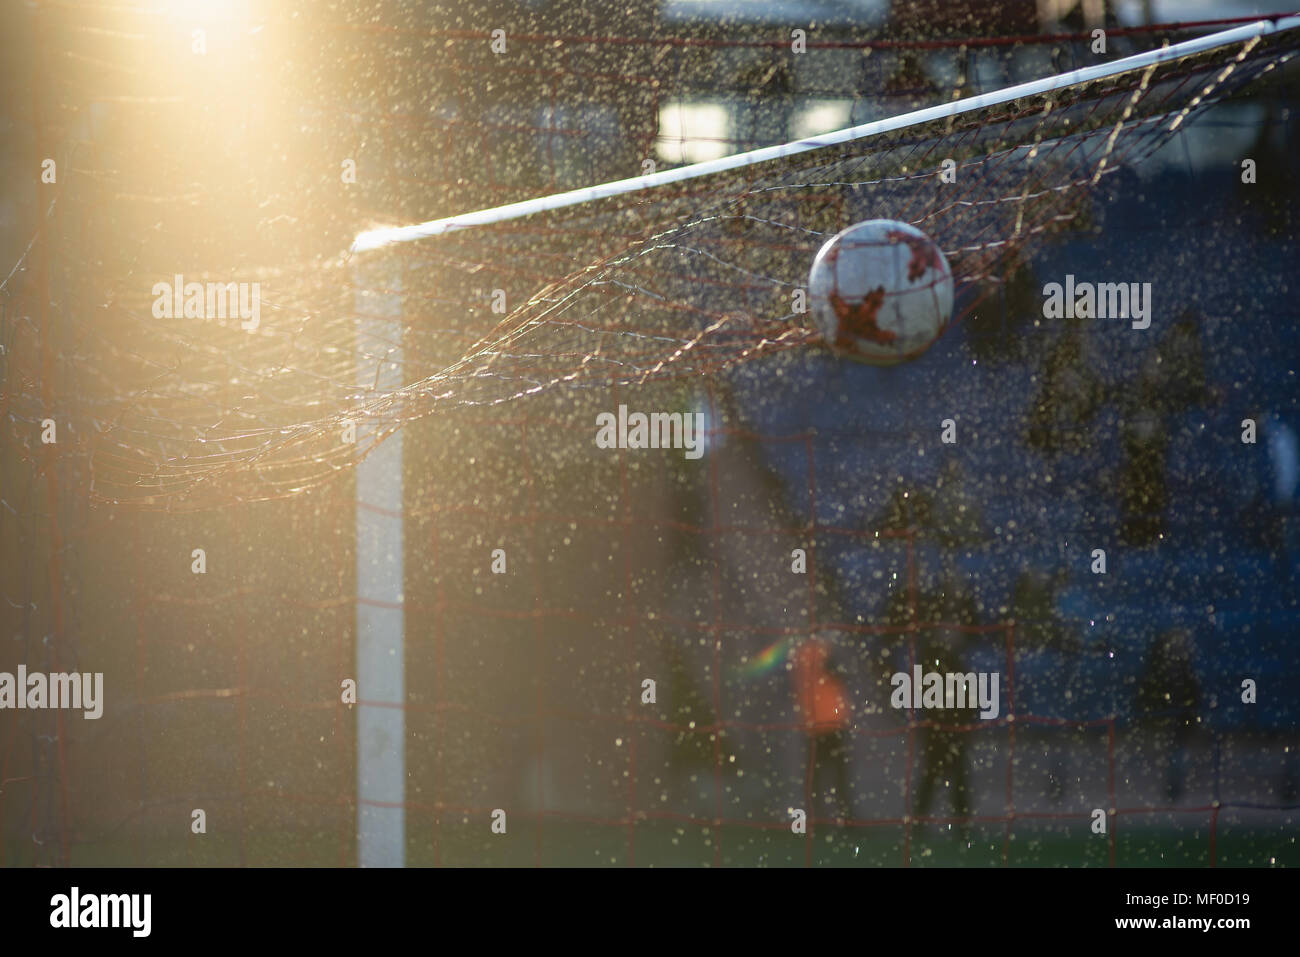 Football soccer sport gates with net on field. Stock Photo